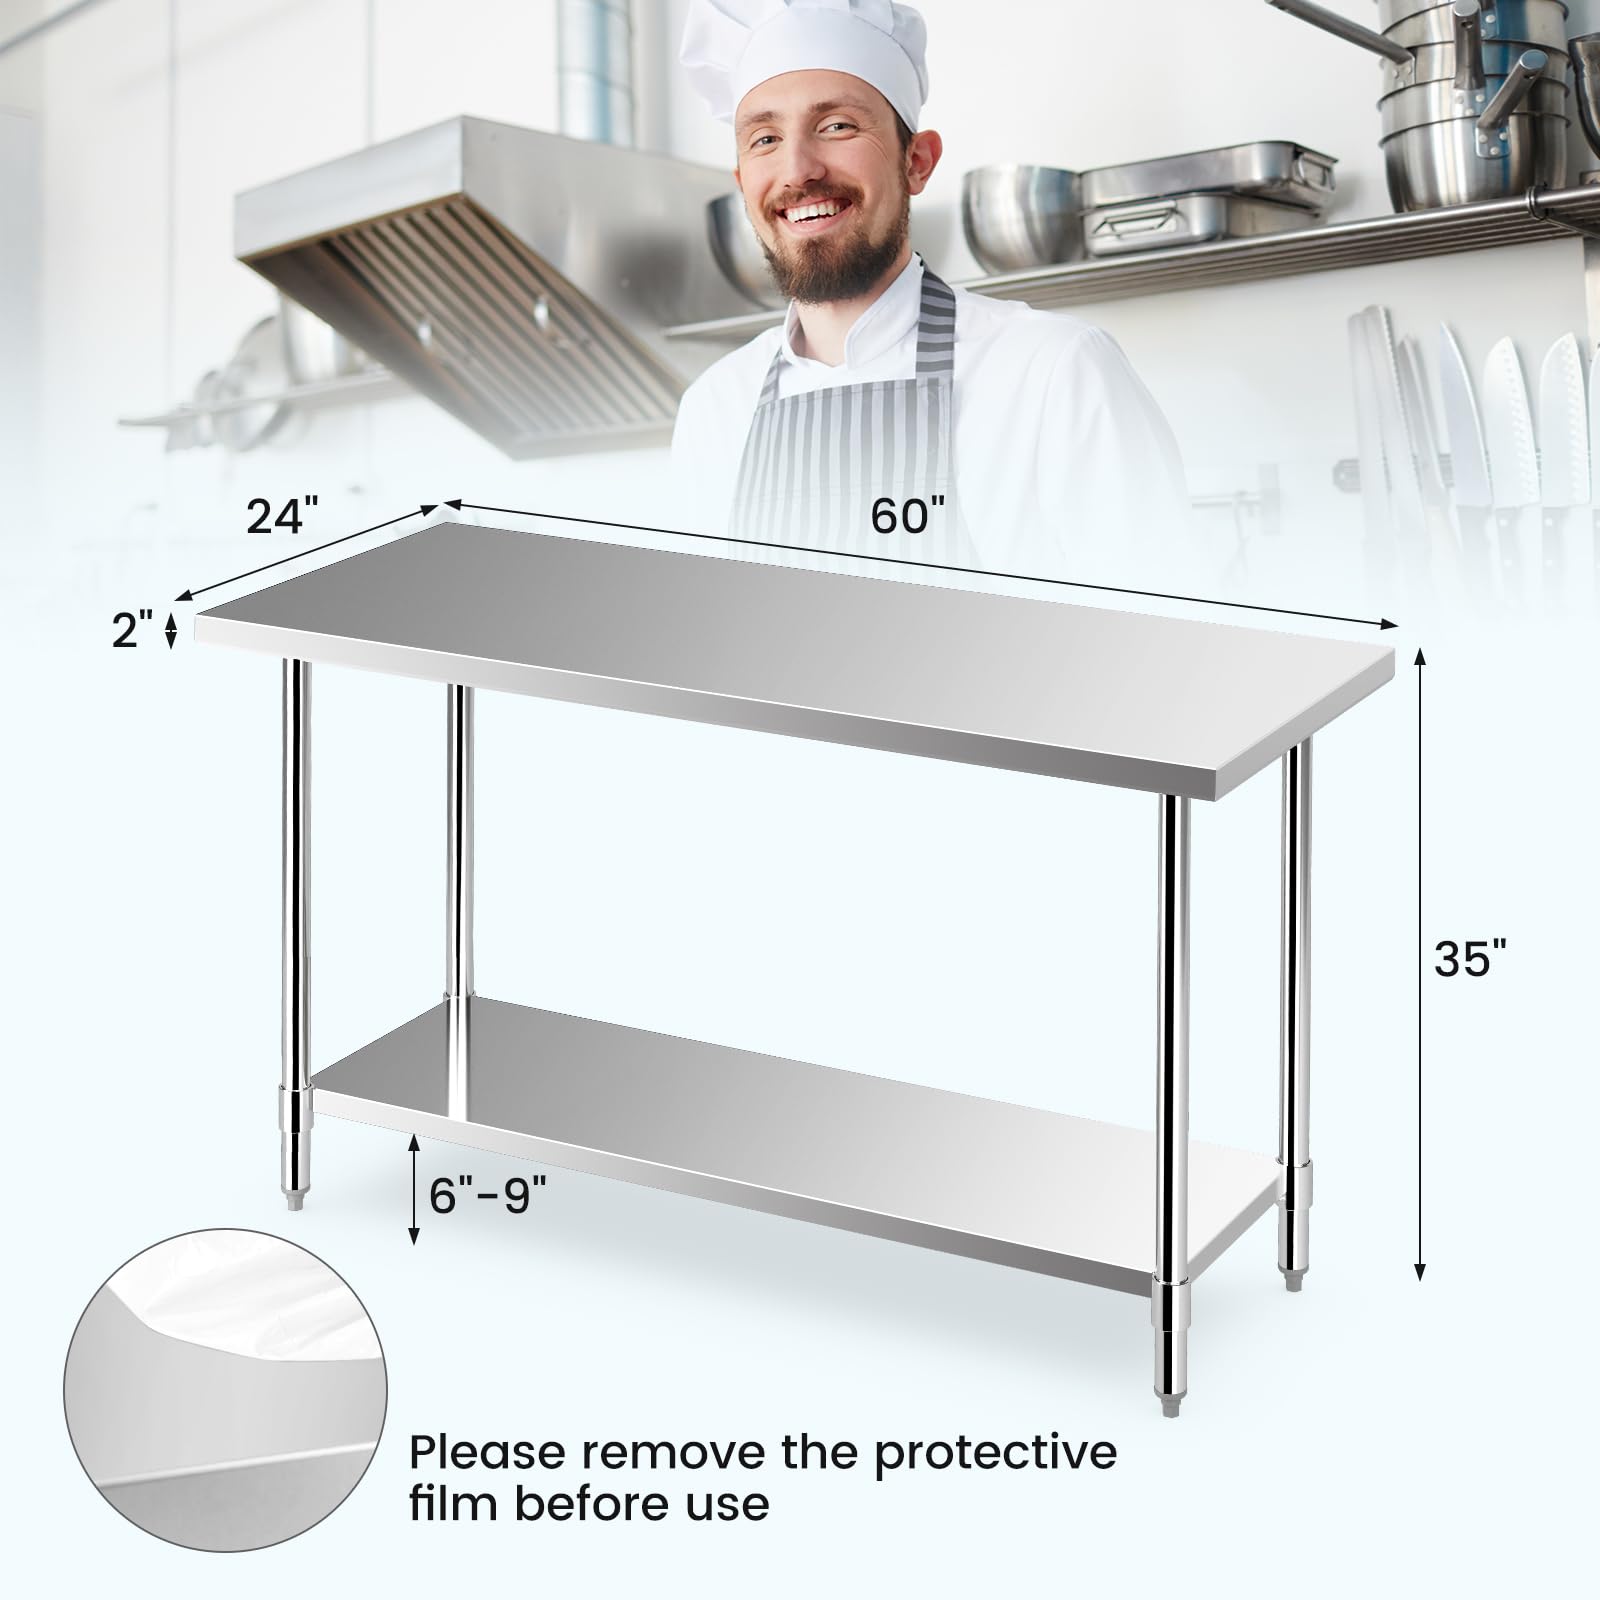 Giantex Stainless Steel Table, 24 x60 Inches Commercial Work Table with Adjustable Undershelf and Foot Pads